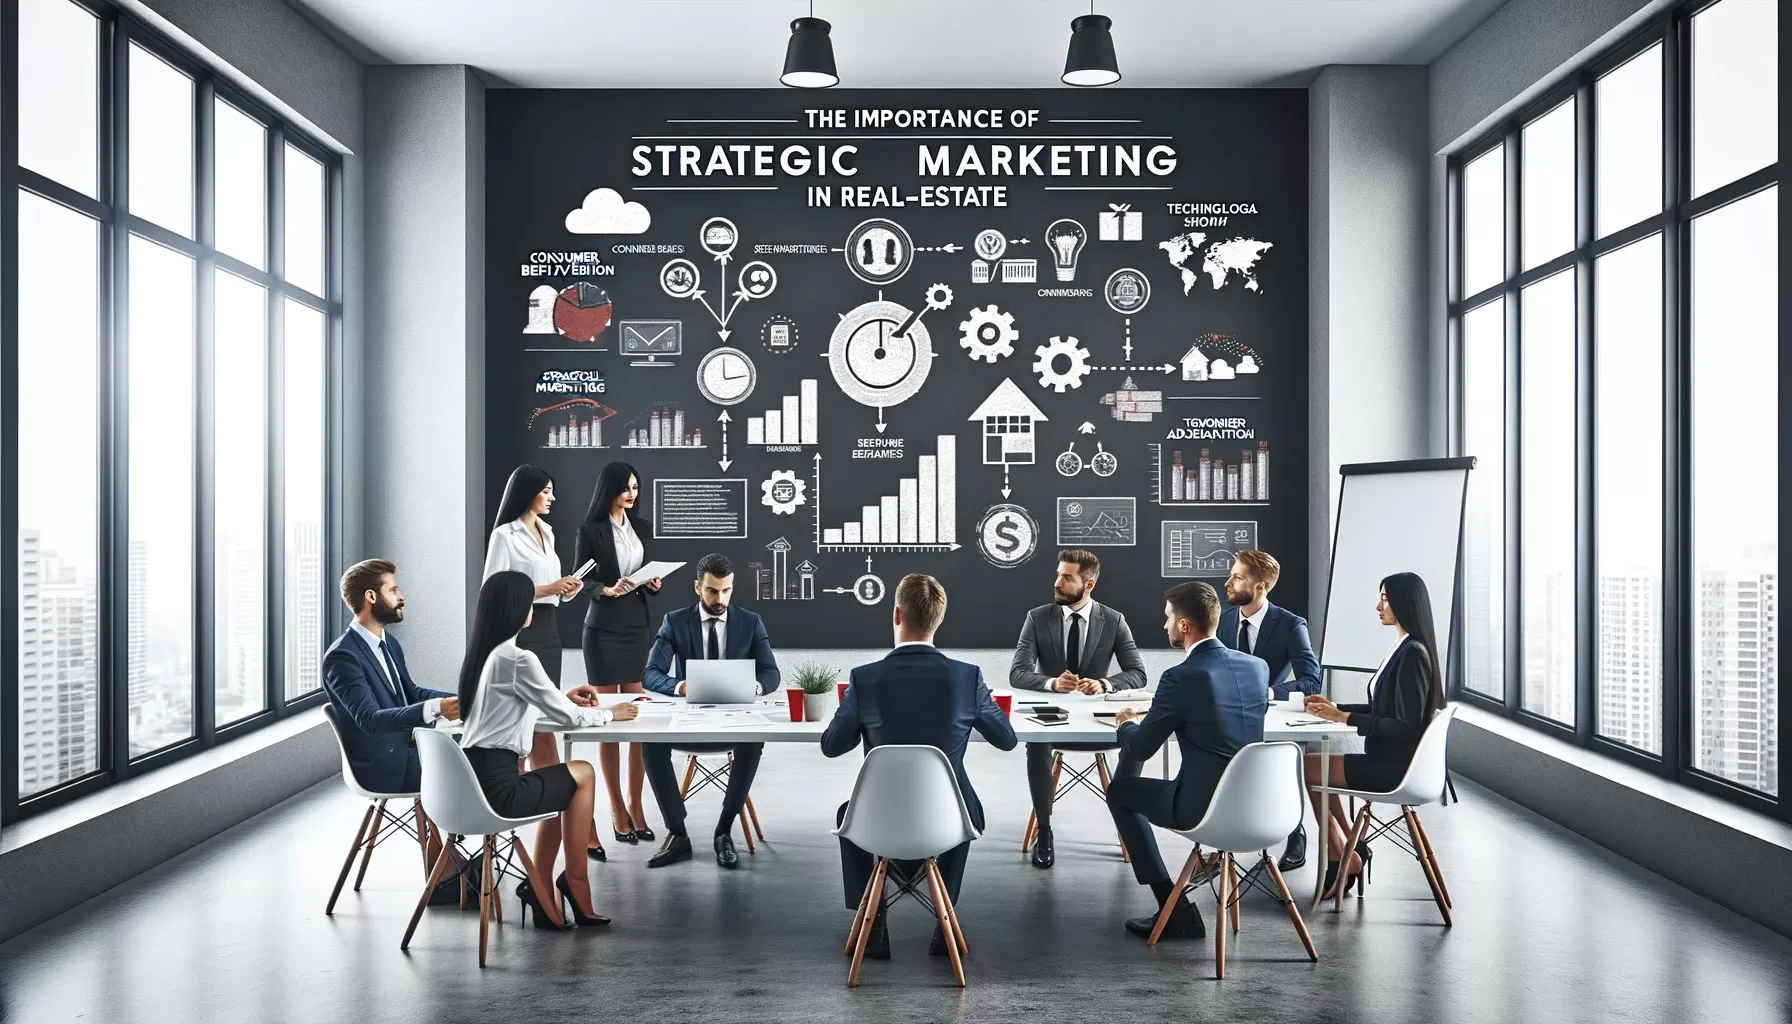 The Importance of Strategic Marketing in Real-Estate